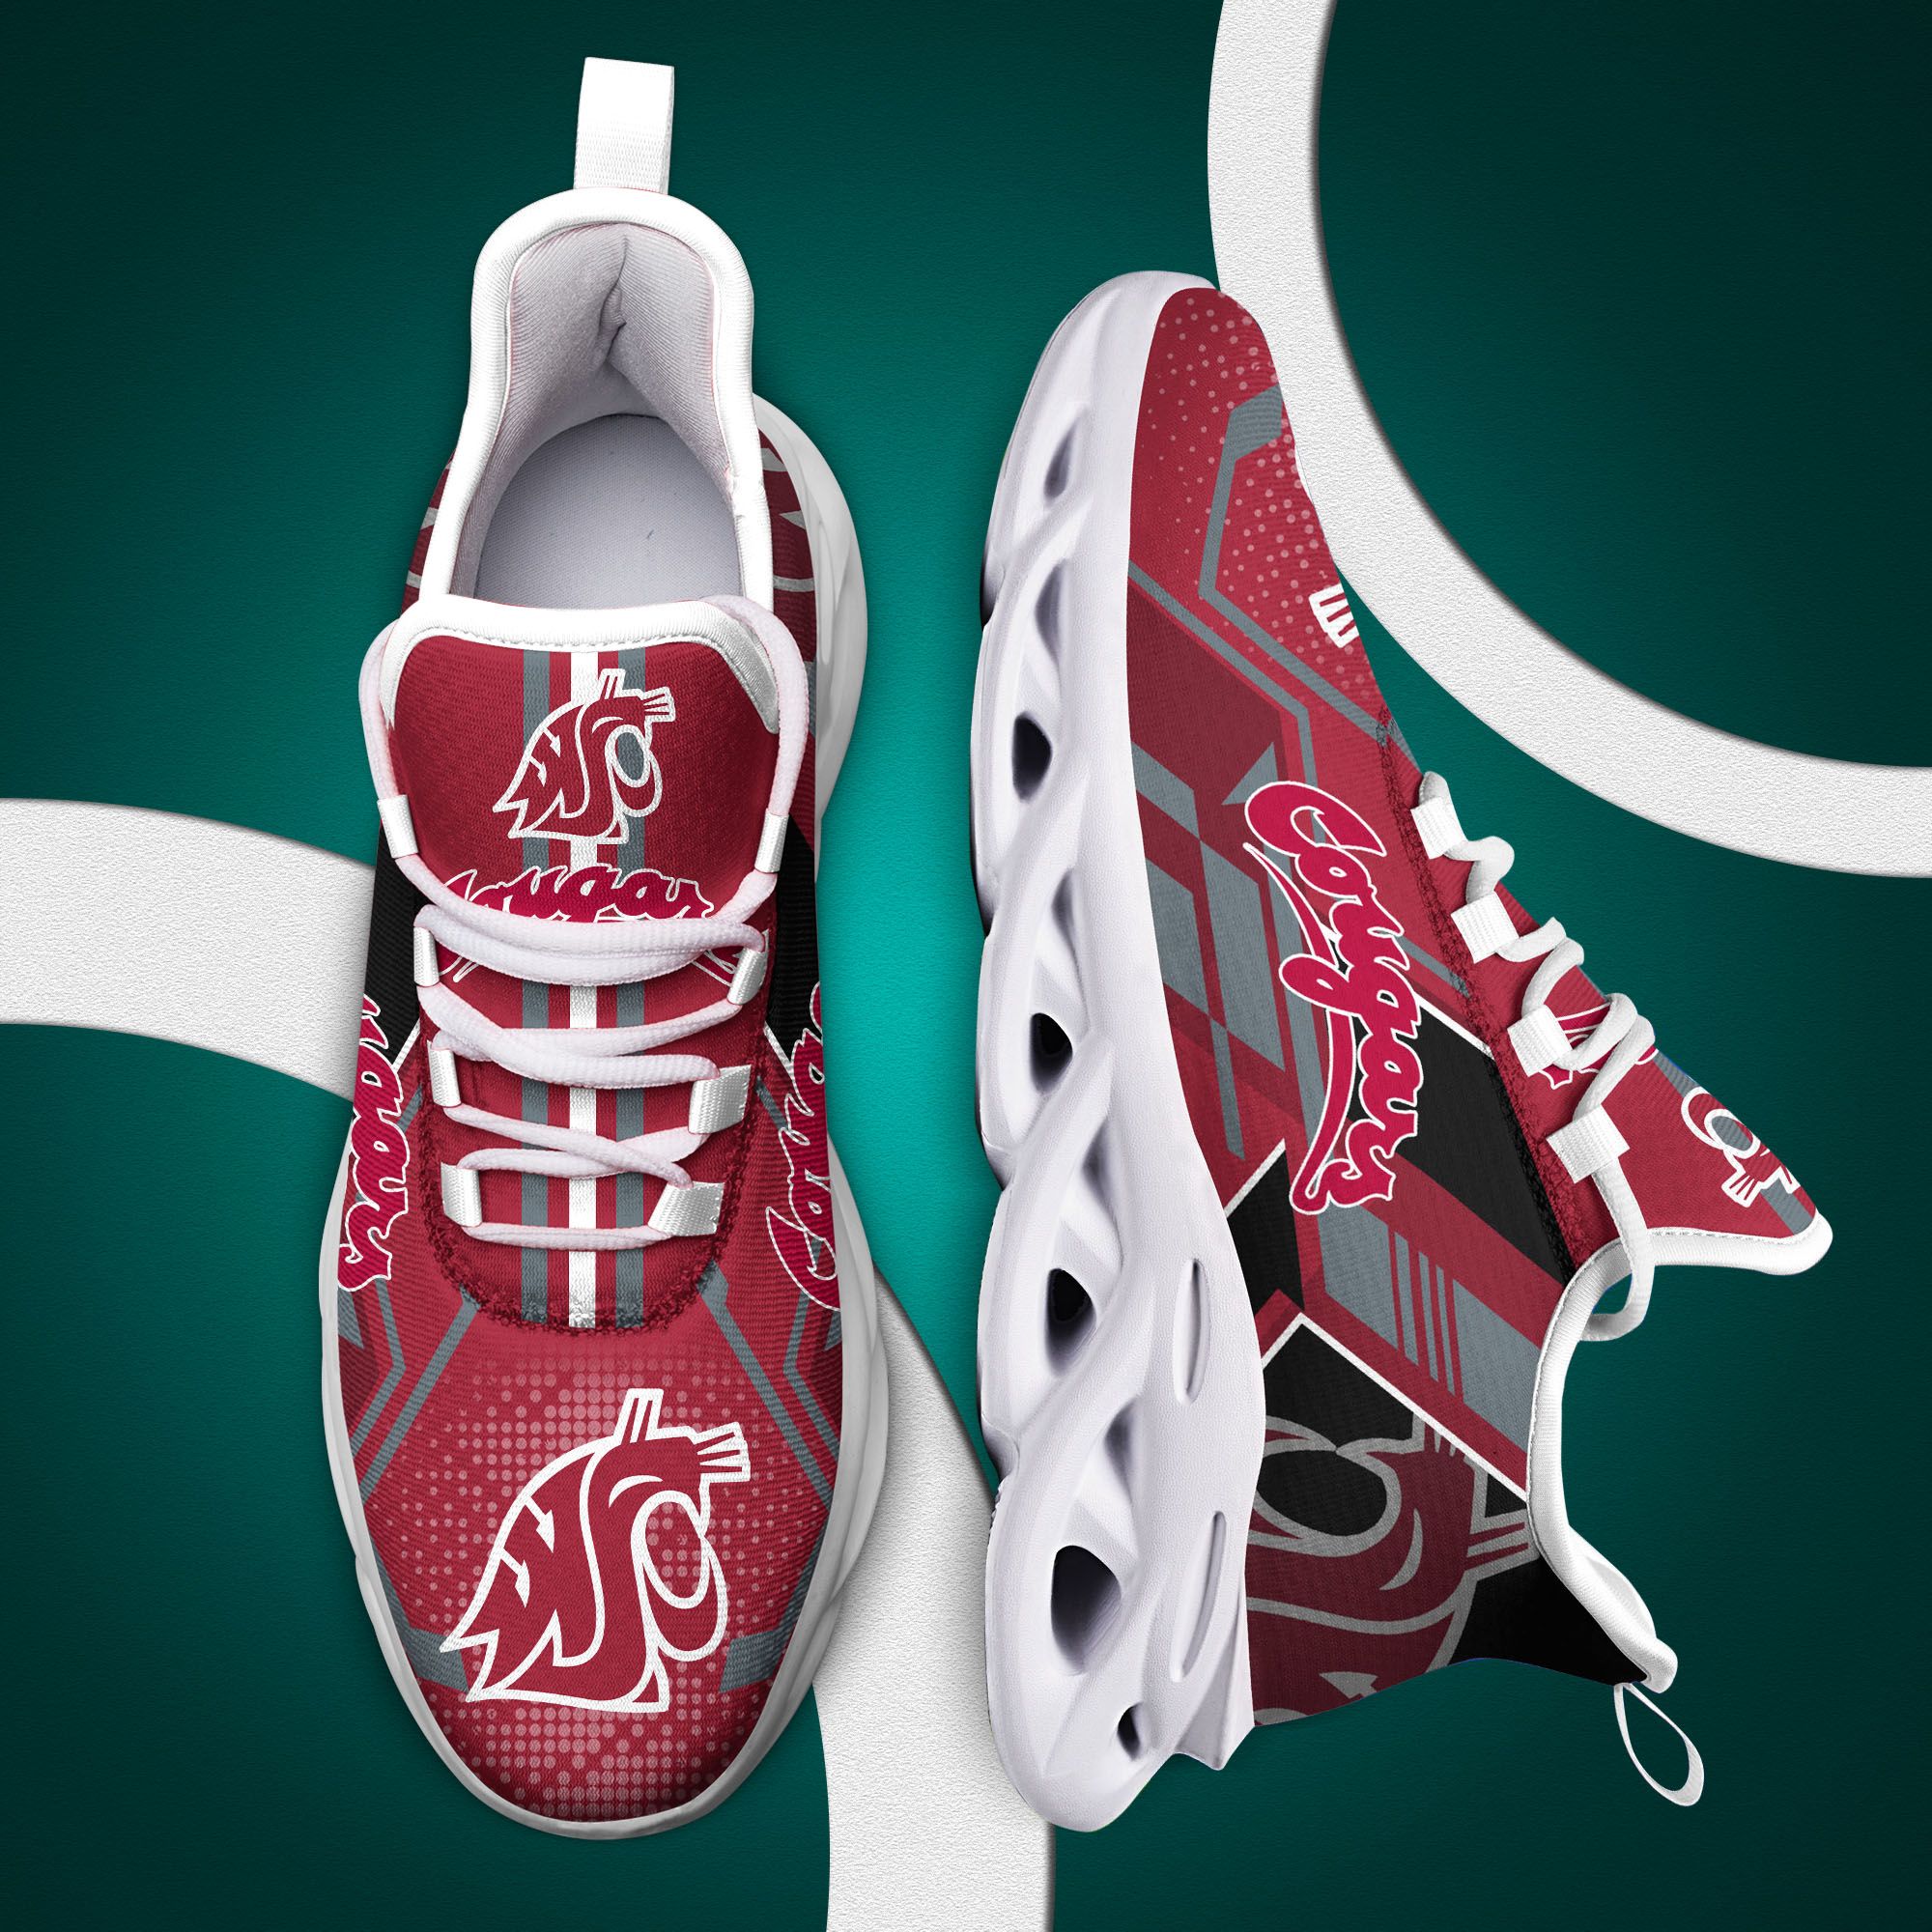 Washington state cougars max soul clunky shoes 4